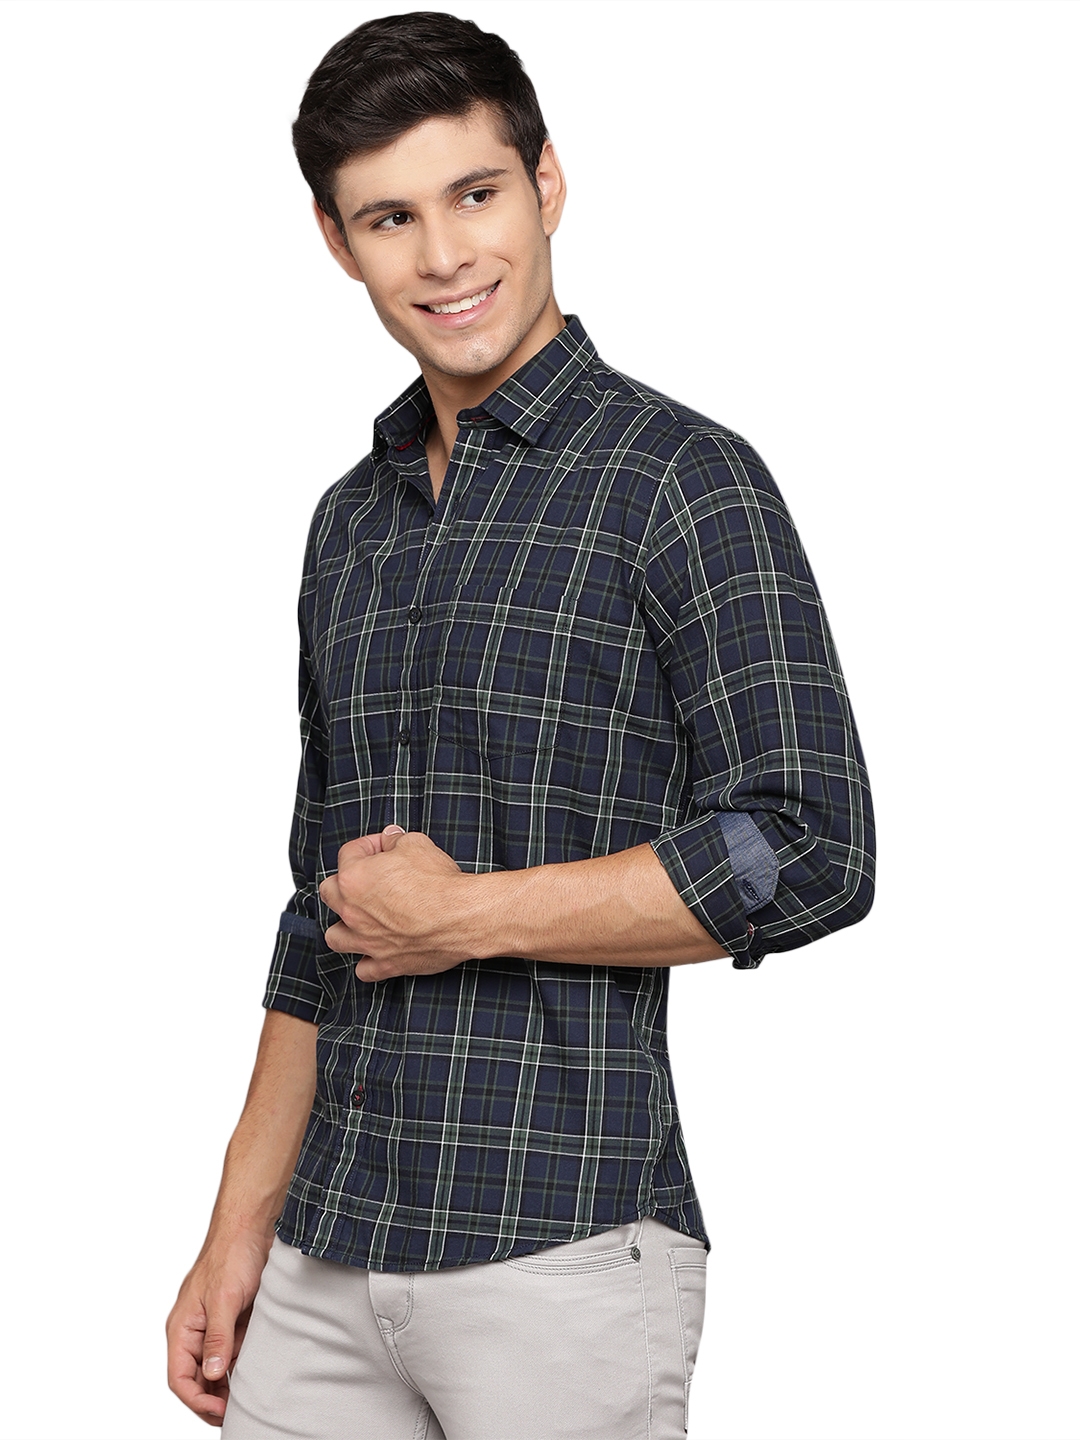 Greenfibre | Insignia Blue Checked Slim Fit Casual Shirt | Greenfibre 1